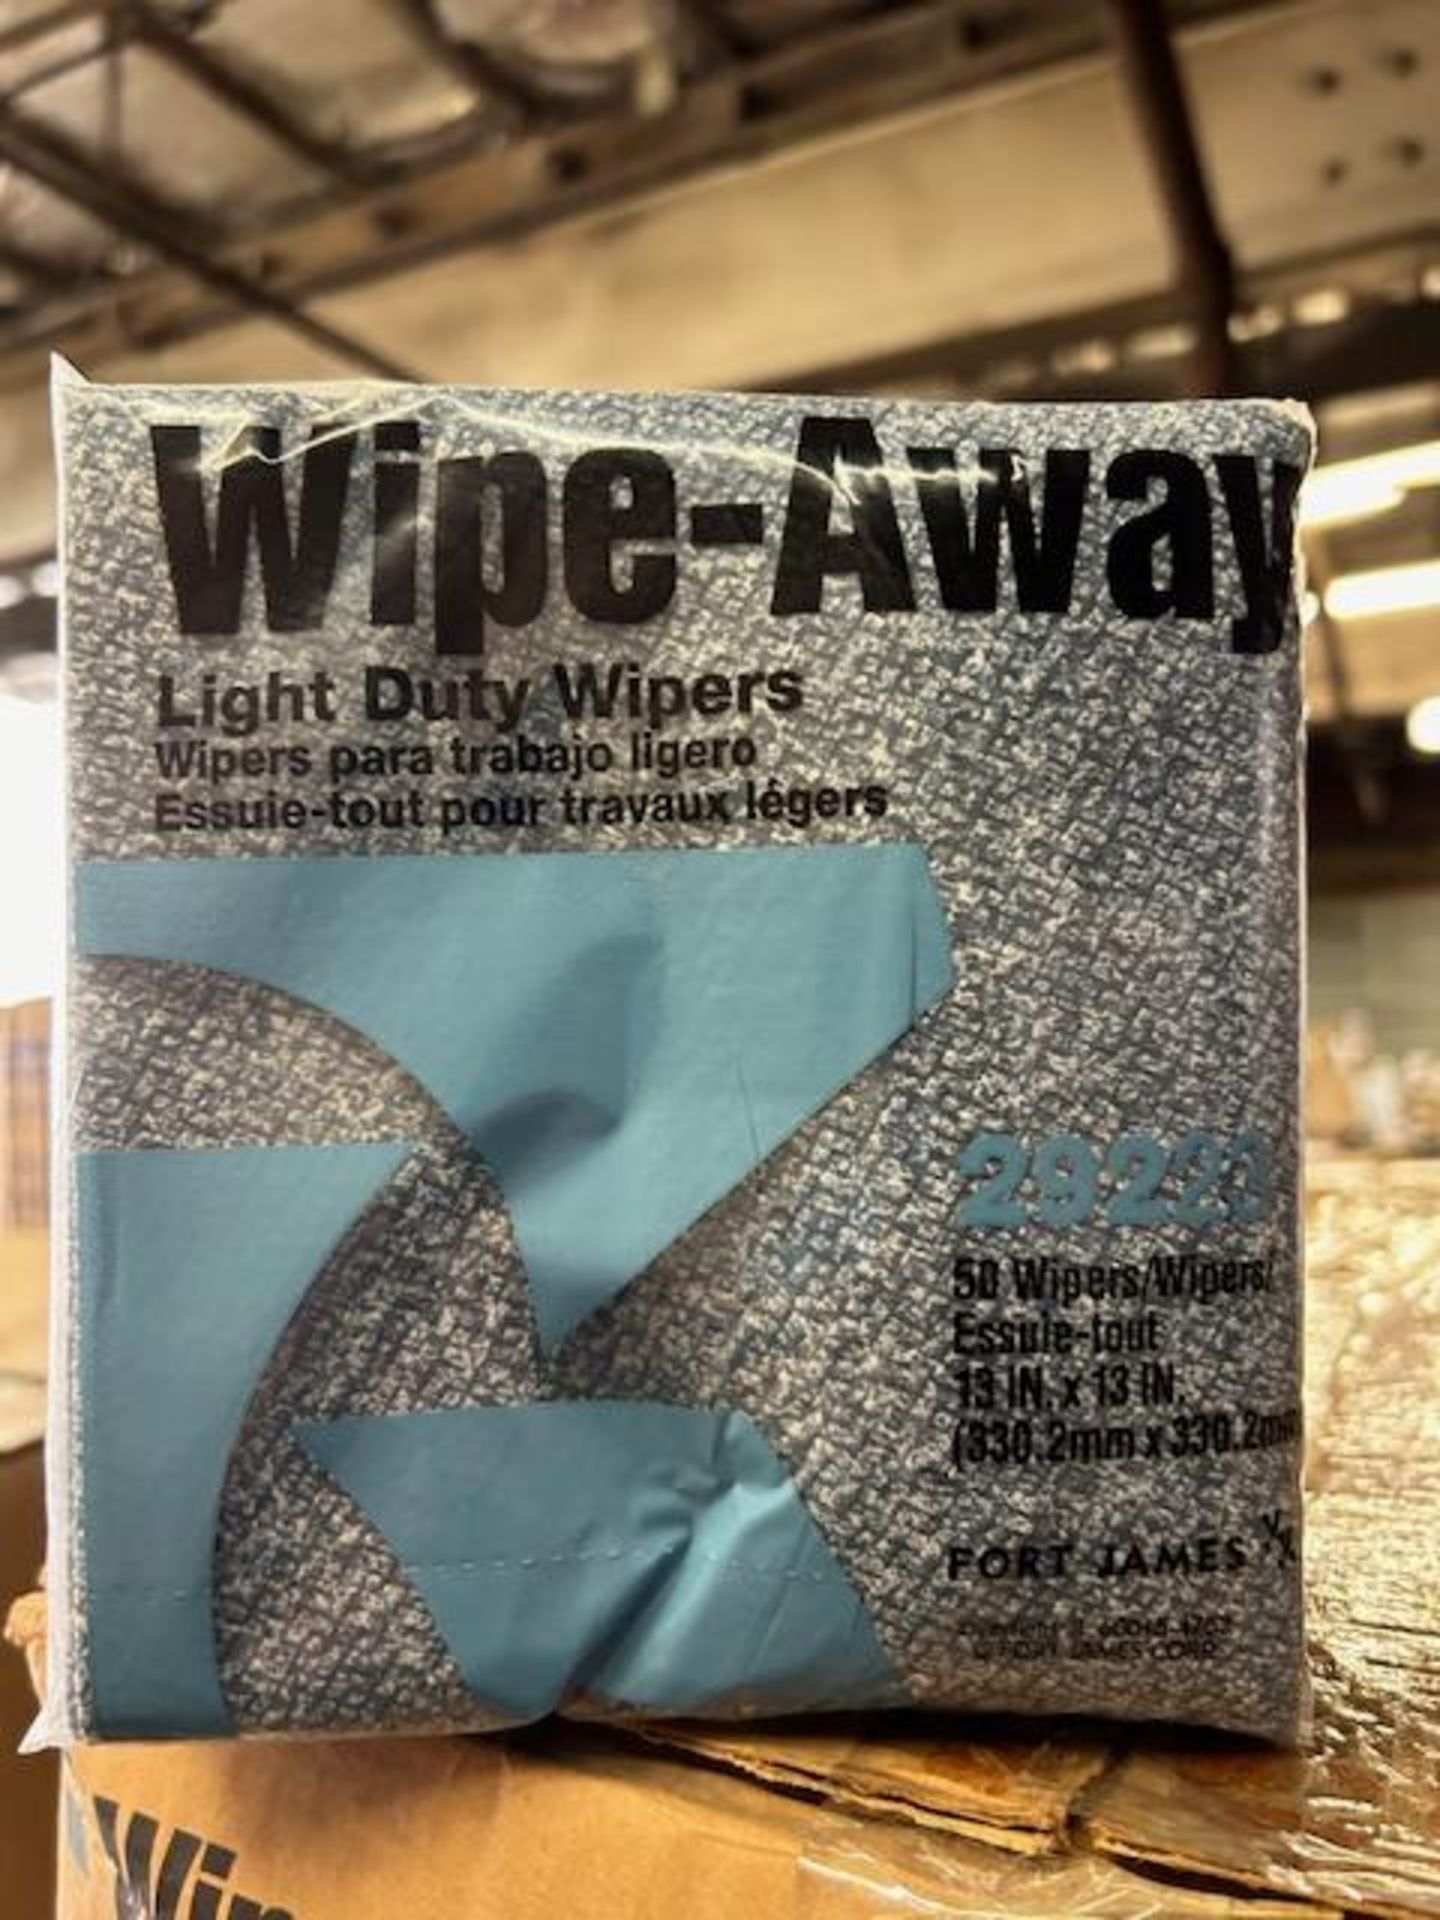 (2) Wipe-Away 13 x 13 Wipers 29223 (Pack 8/50 Count) - Image 2 of 3